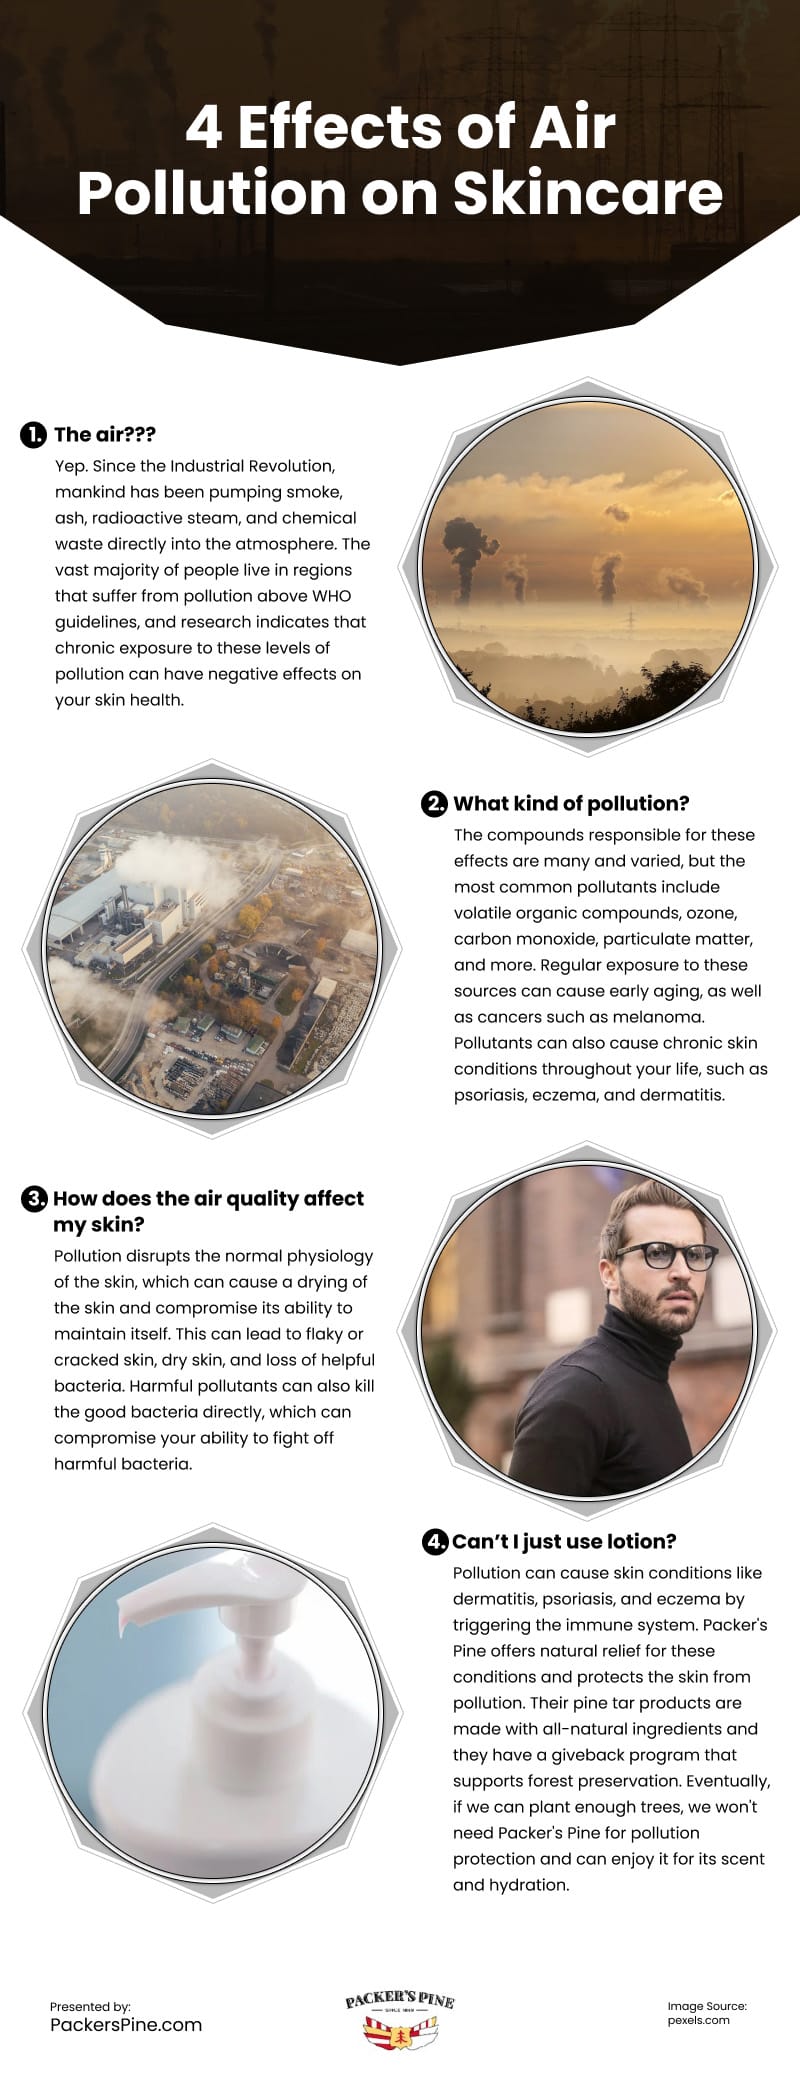 4 Effects of Air Pollution on Skincare Infographic